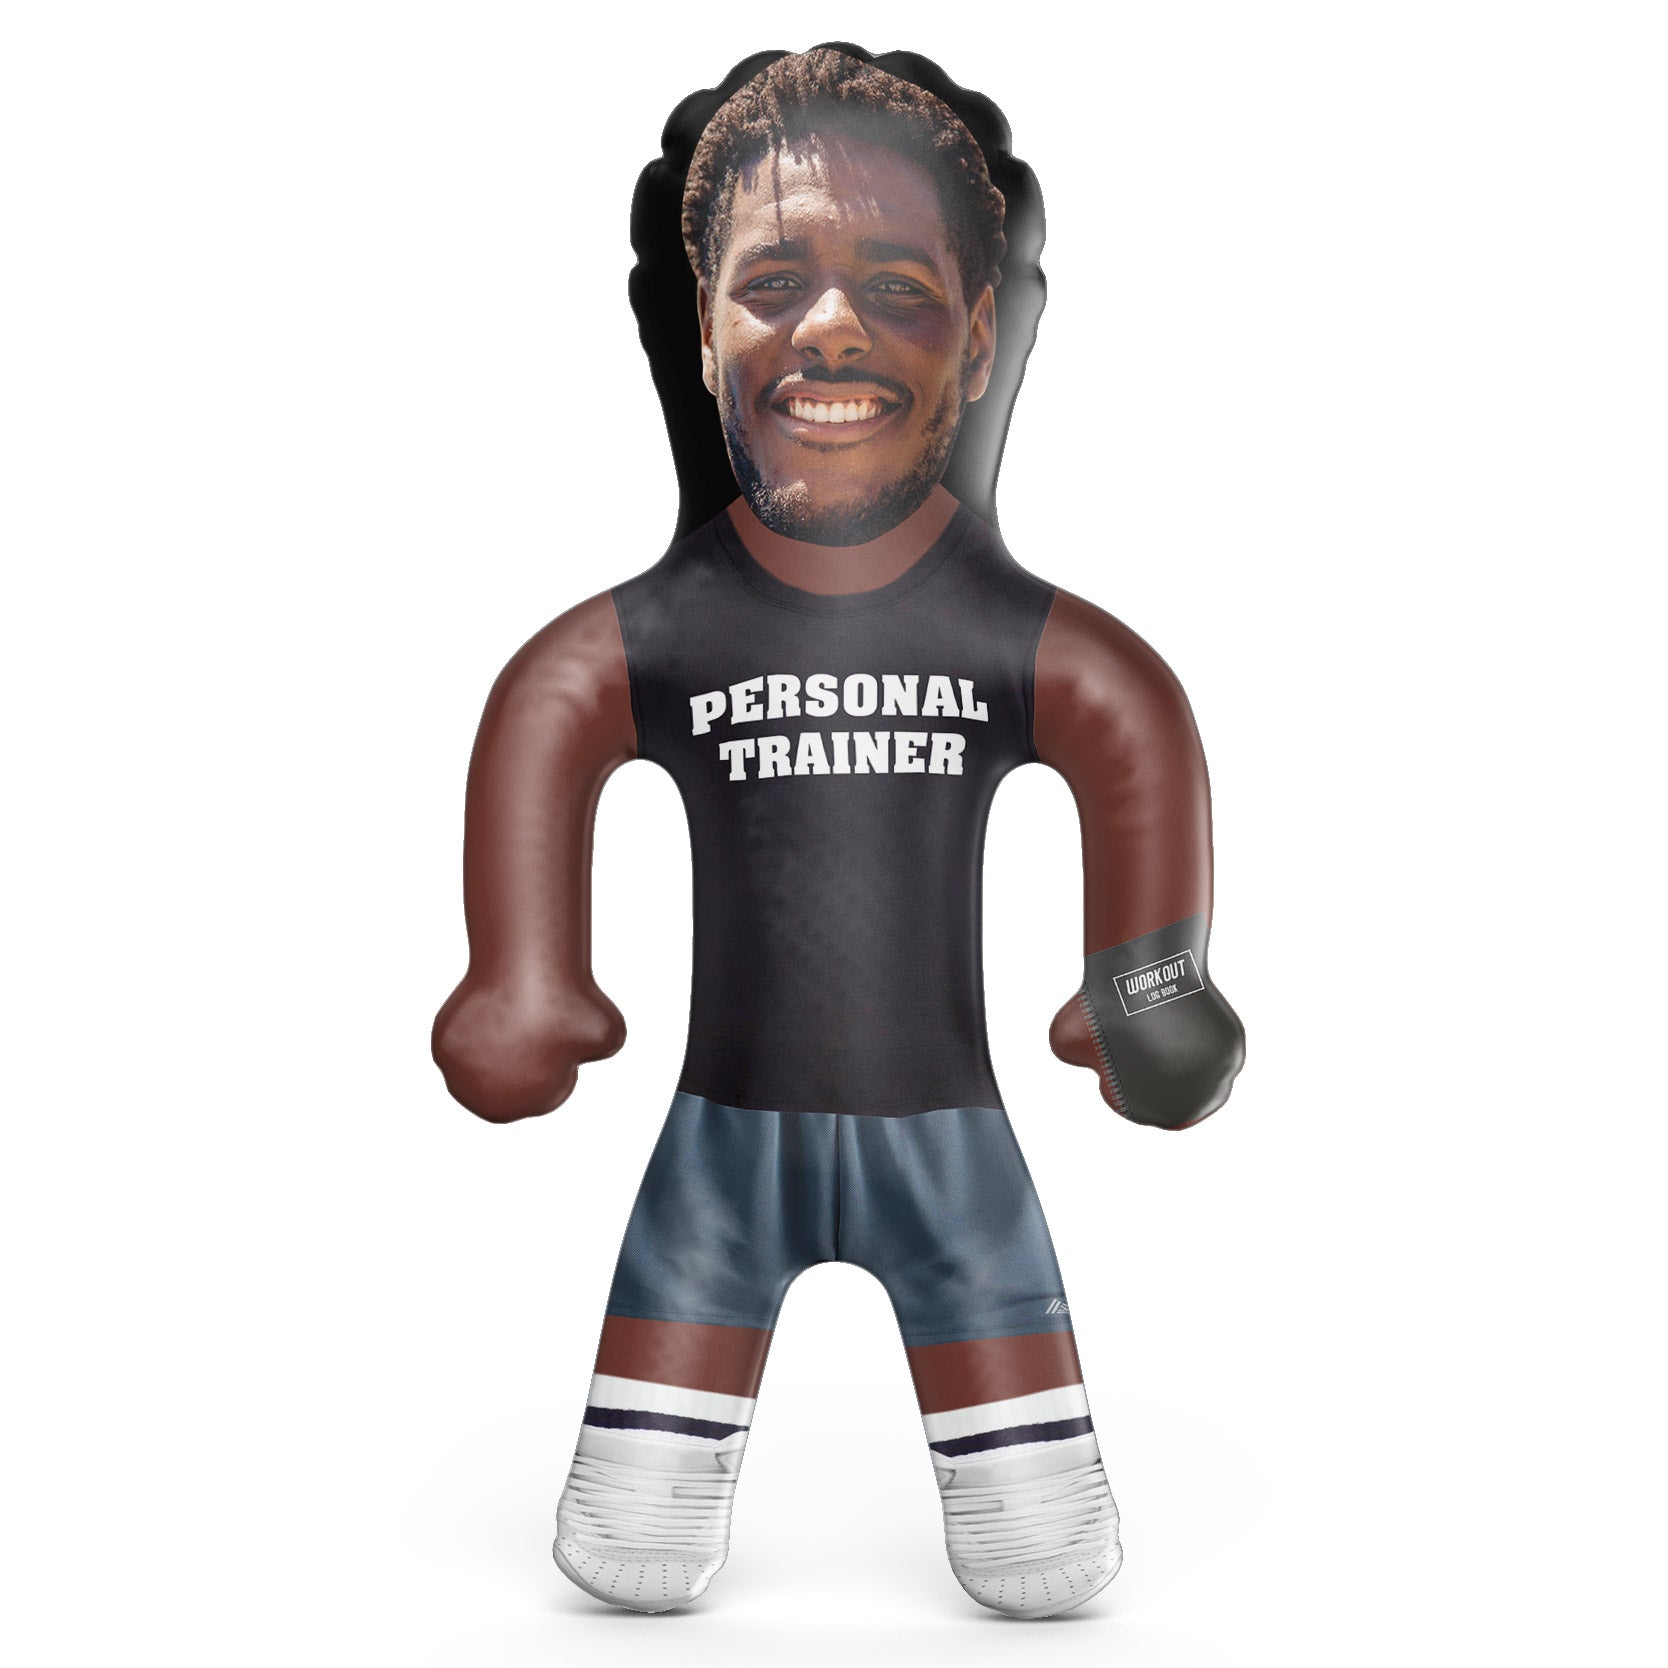 Personal Trainer Inflatable Doll - Custom Blow Up Doll